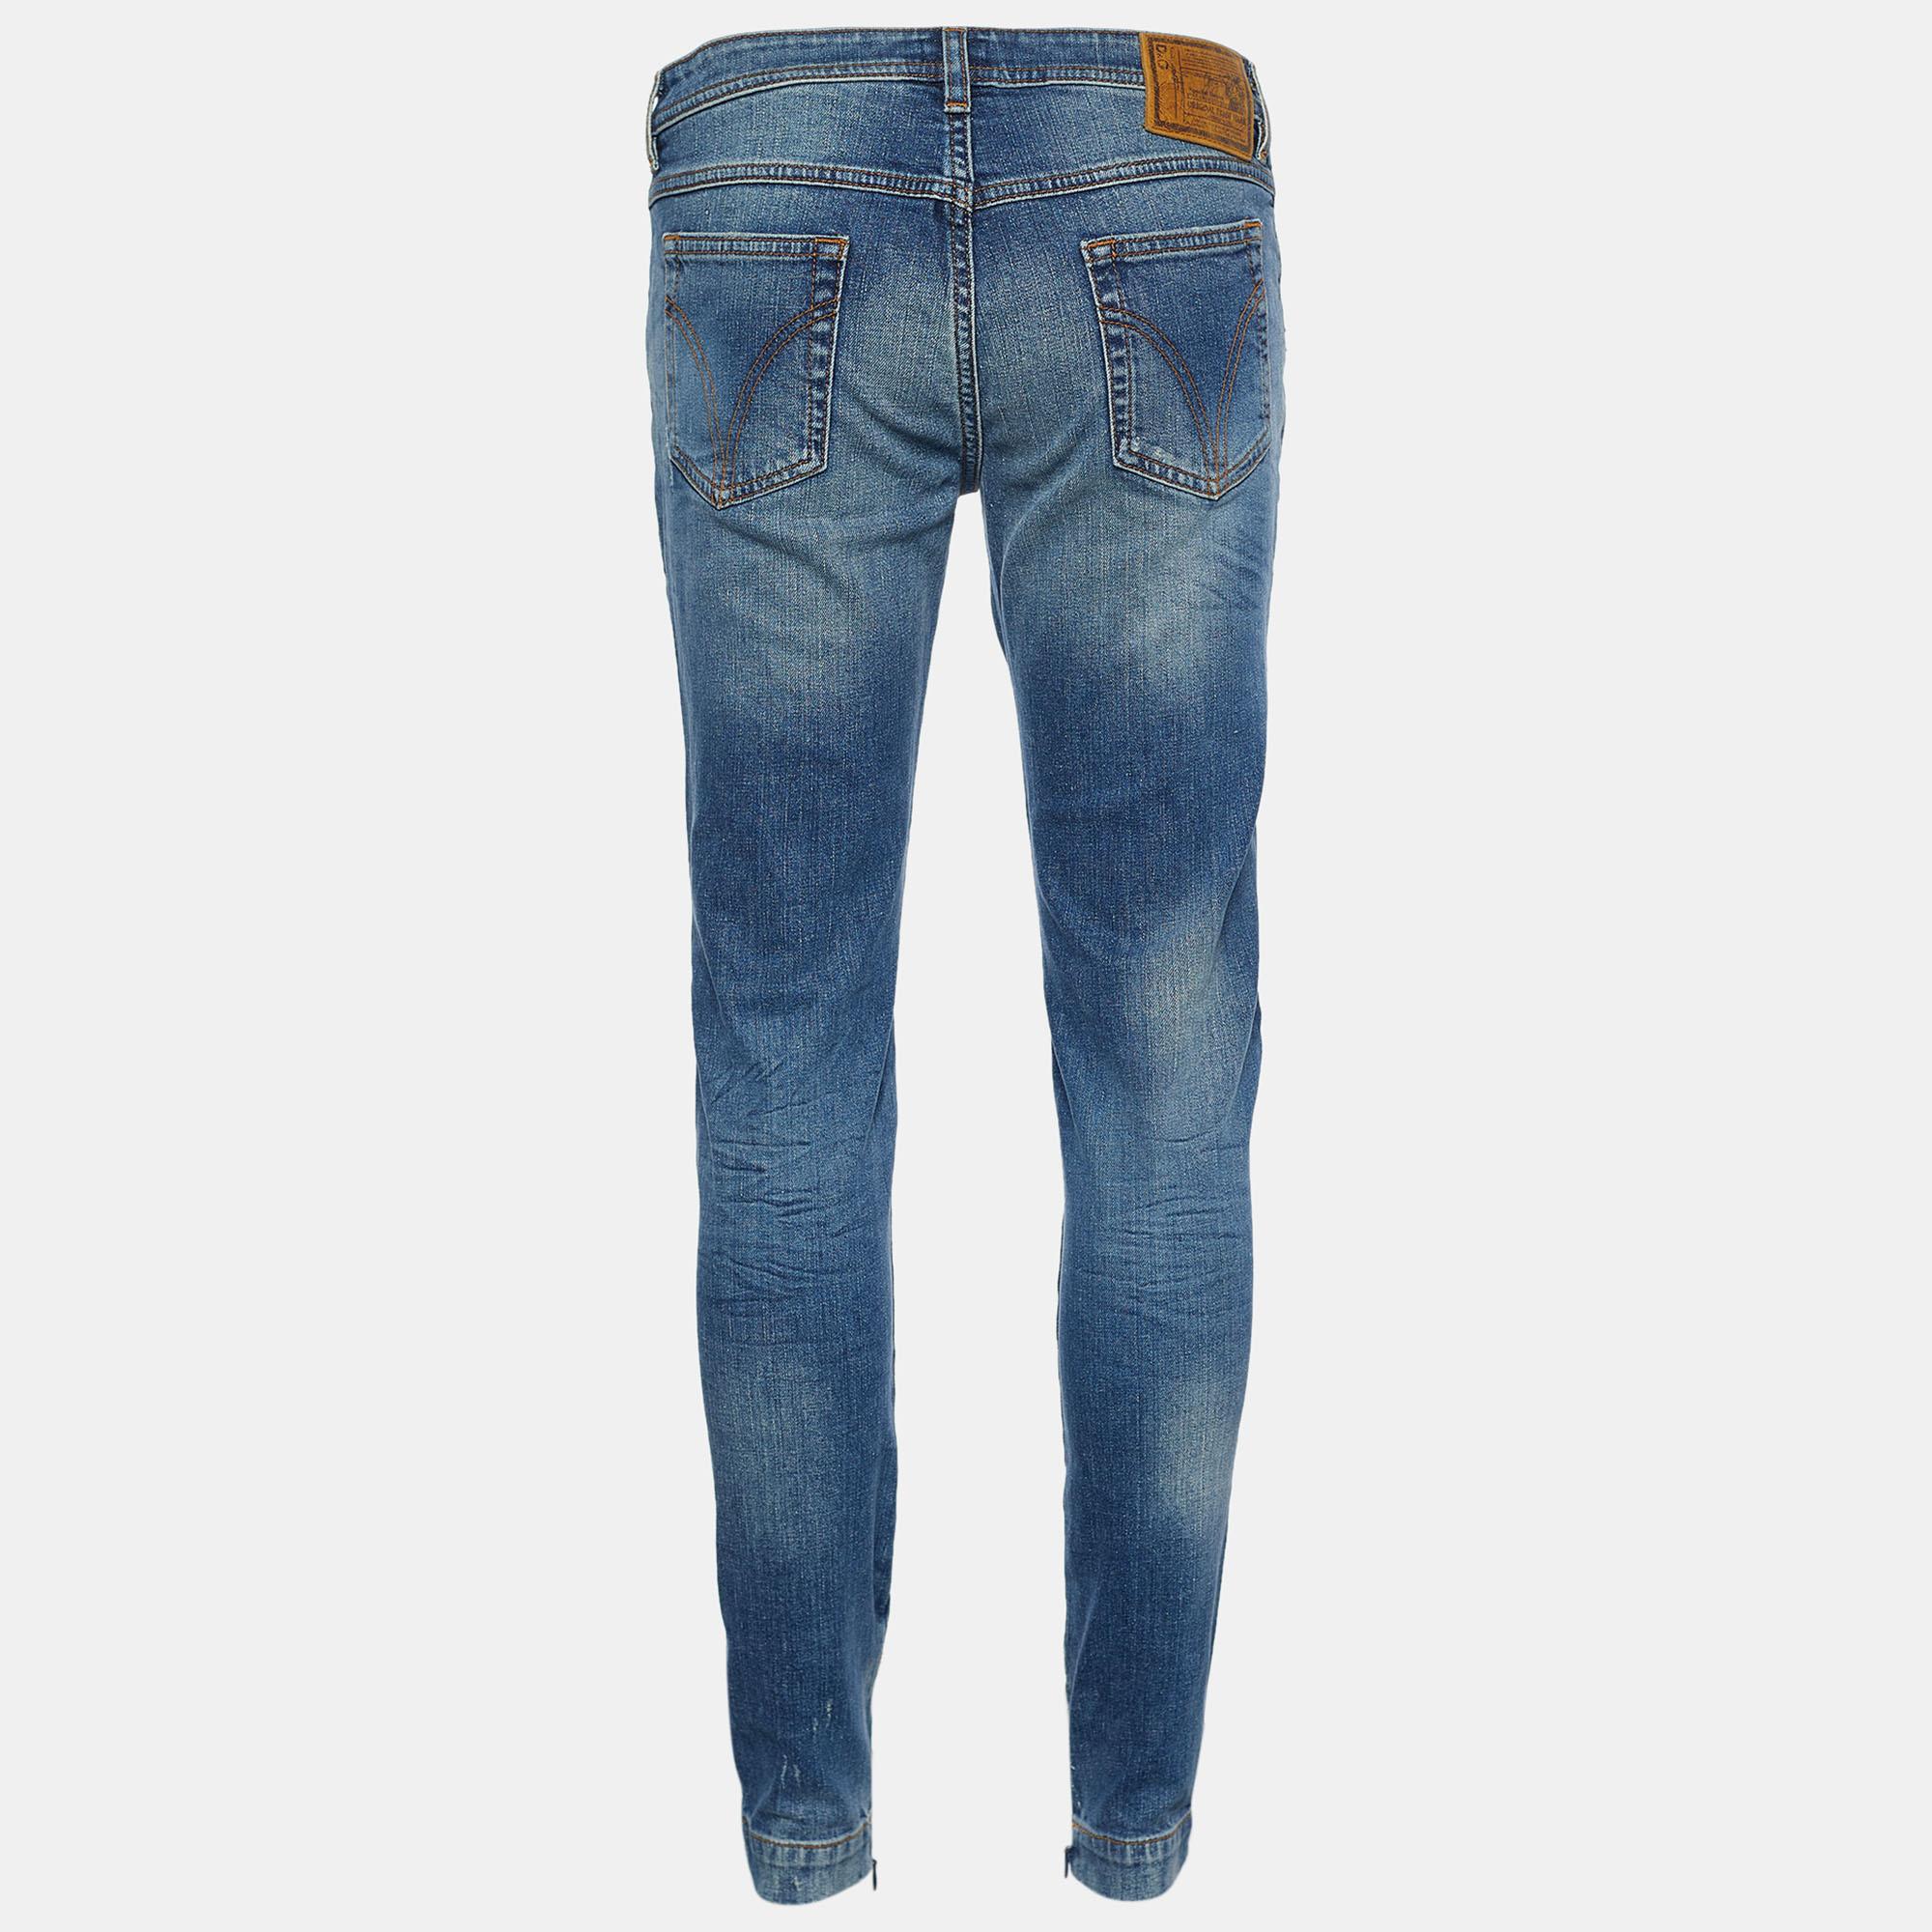 Comfy and classy jeans like these are a closet necessity! These jeans from D&G are super stylish and chic. They have been fashioned in indigo distressed denim fabric into a skinny-fit silhouette. These jeans are provided with a zipper closure.

